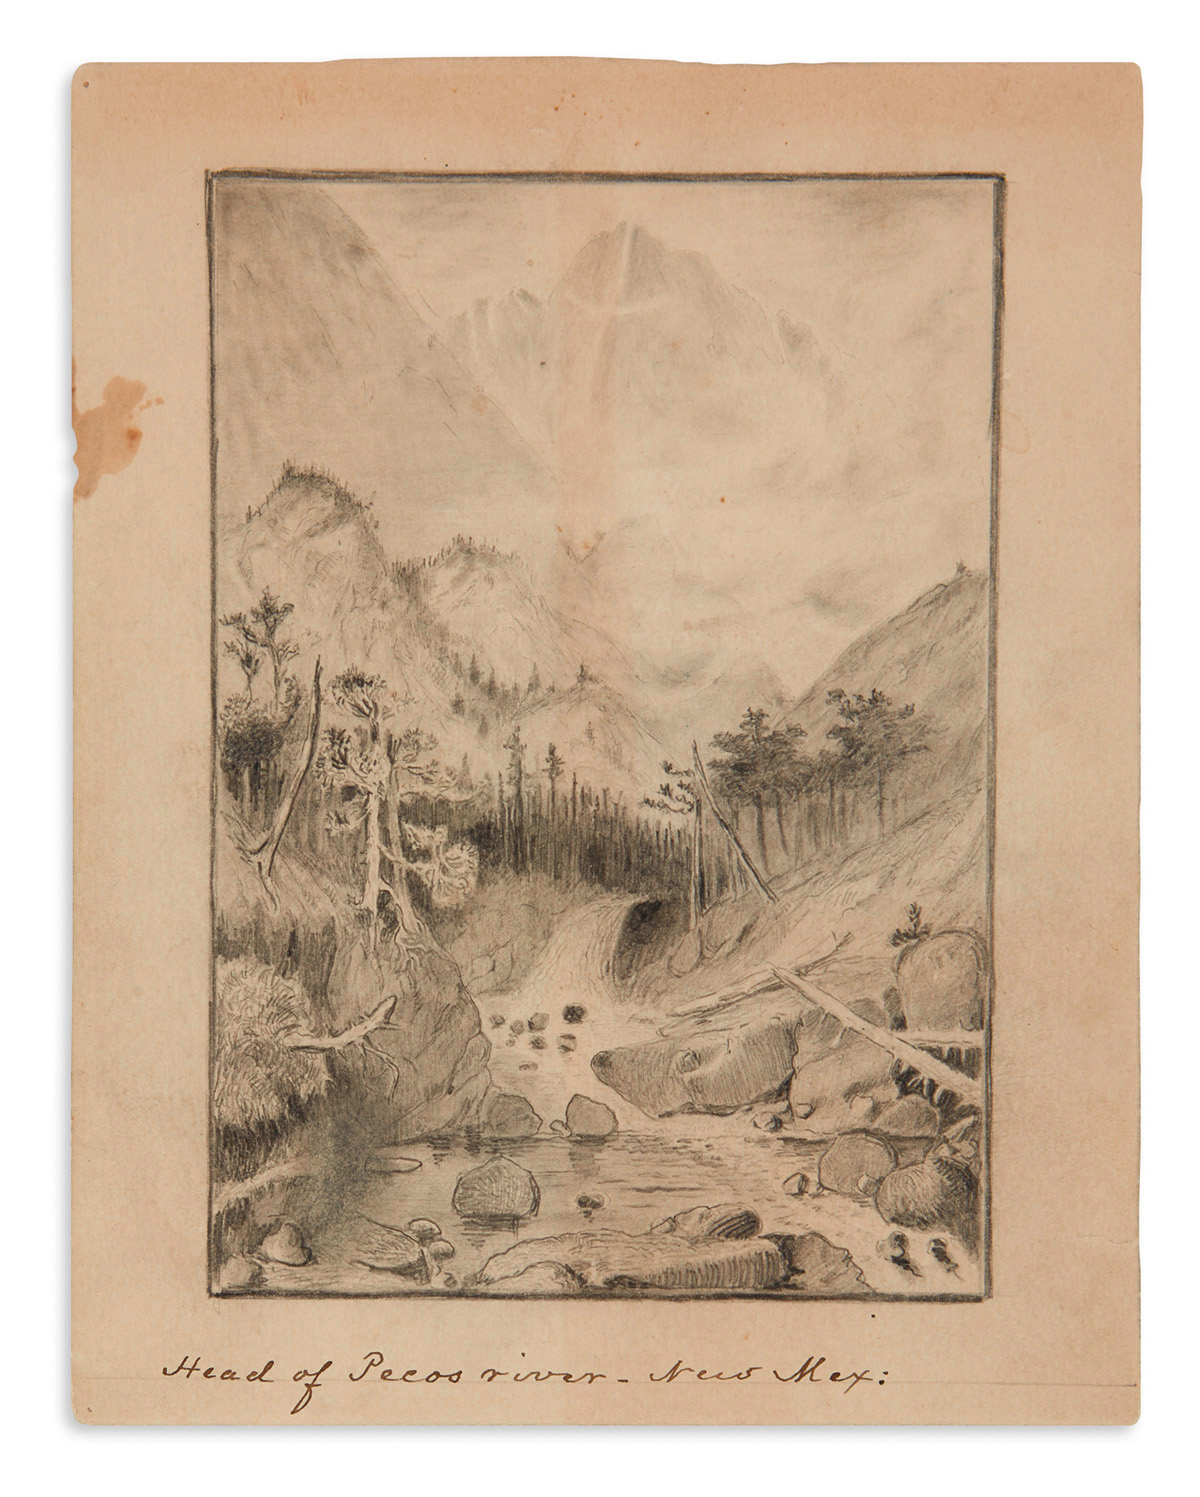 (WEST.) William Sydney Porter, a.k.a. O. Henry. Illustrations for a lost mining memoir, drawn long before his fame as an author.